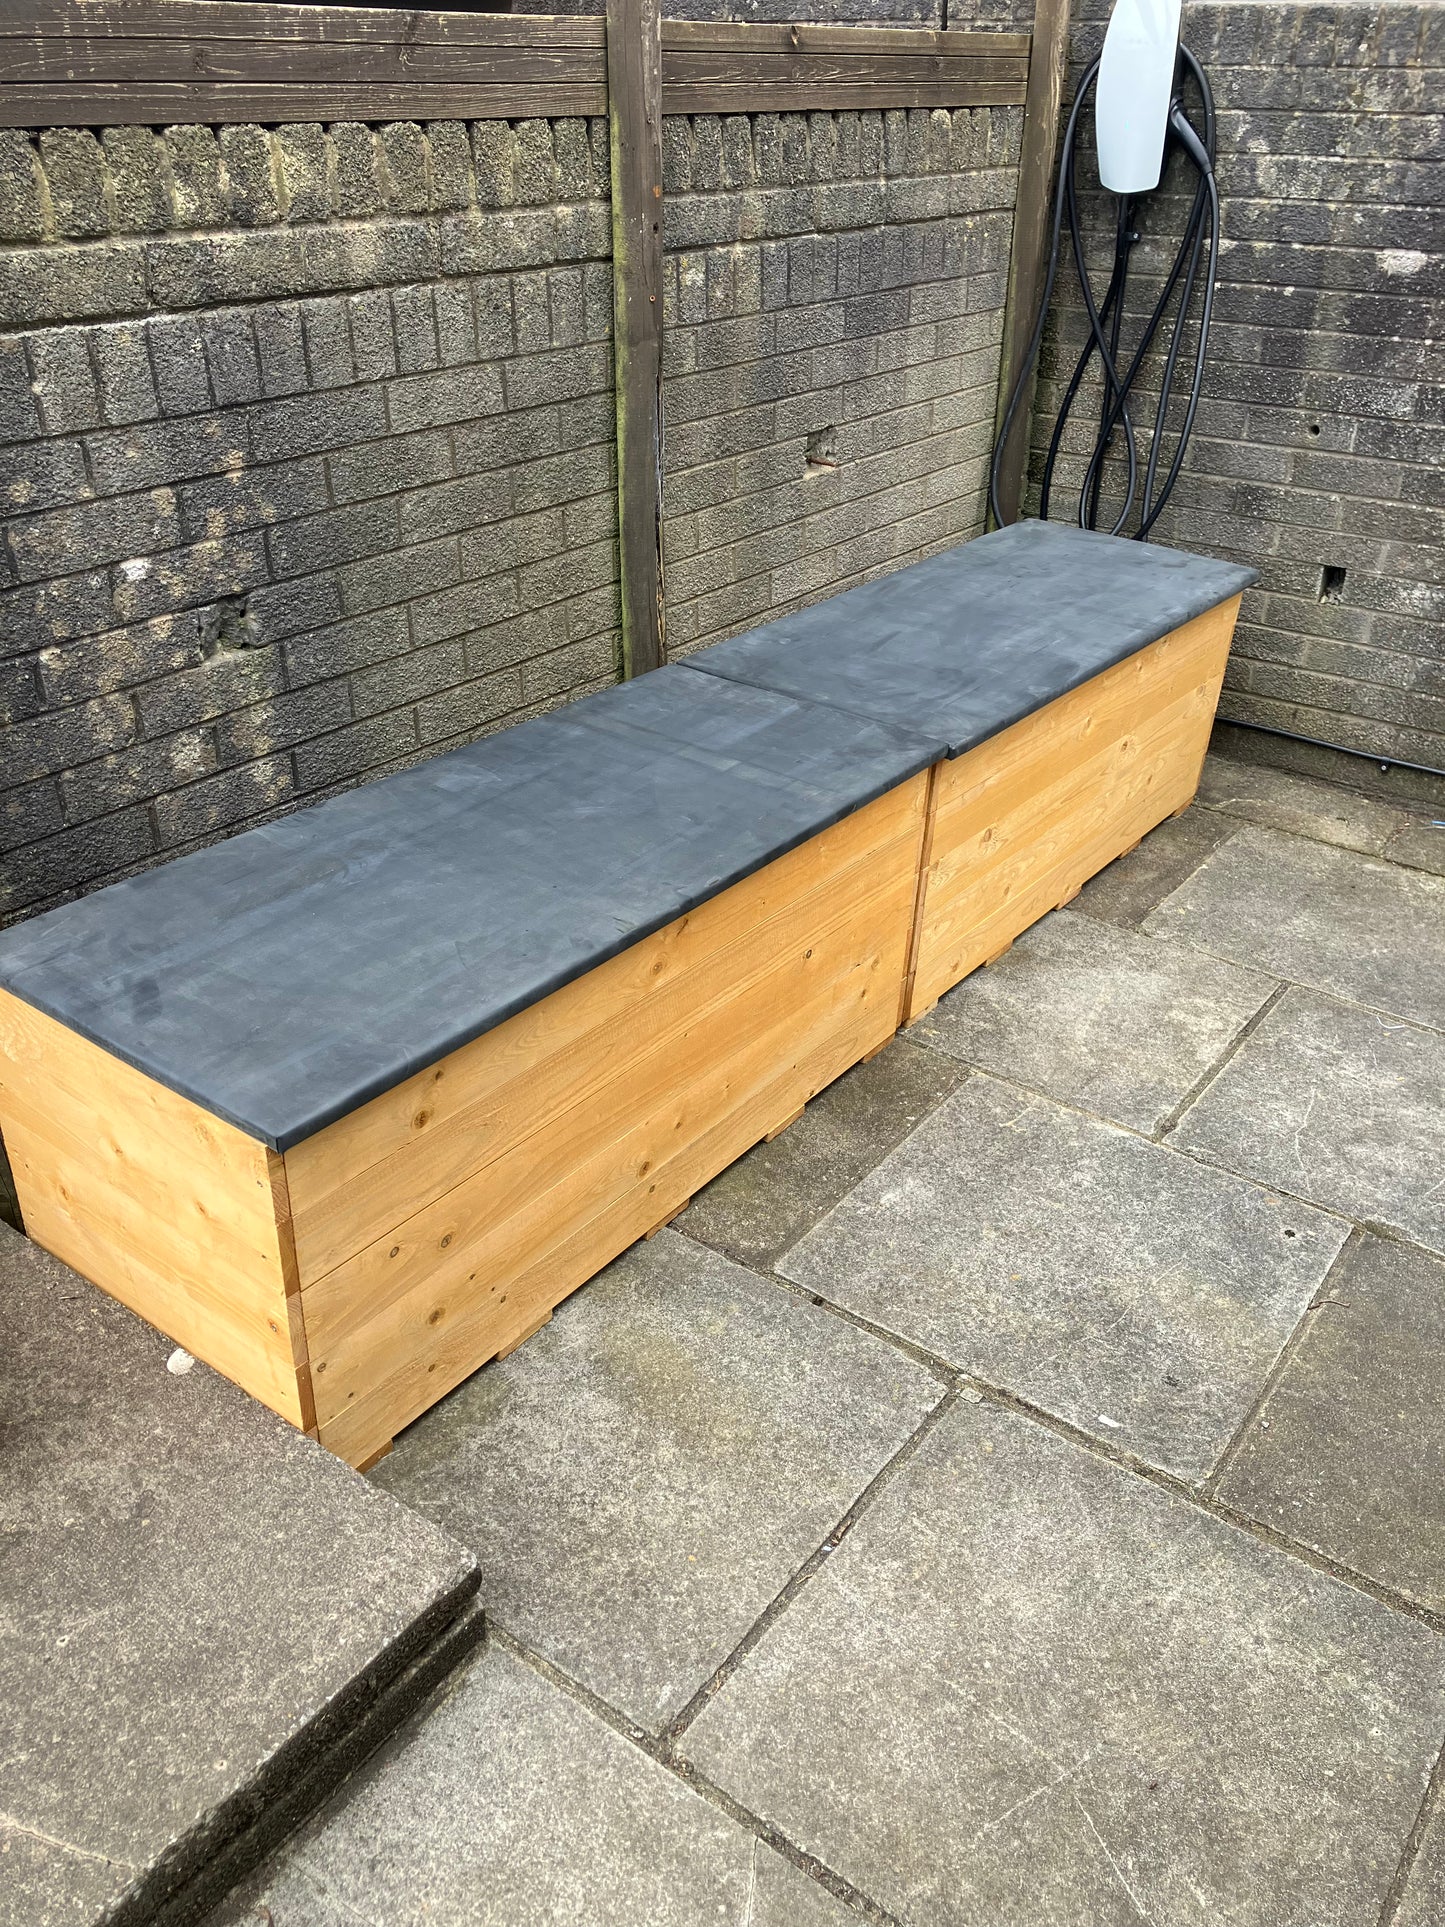 Two Recycling Storage Benches with EPDM rubber lids